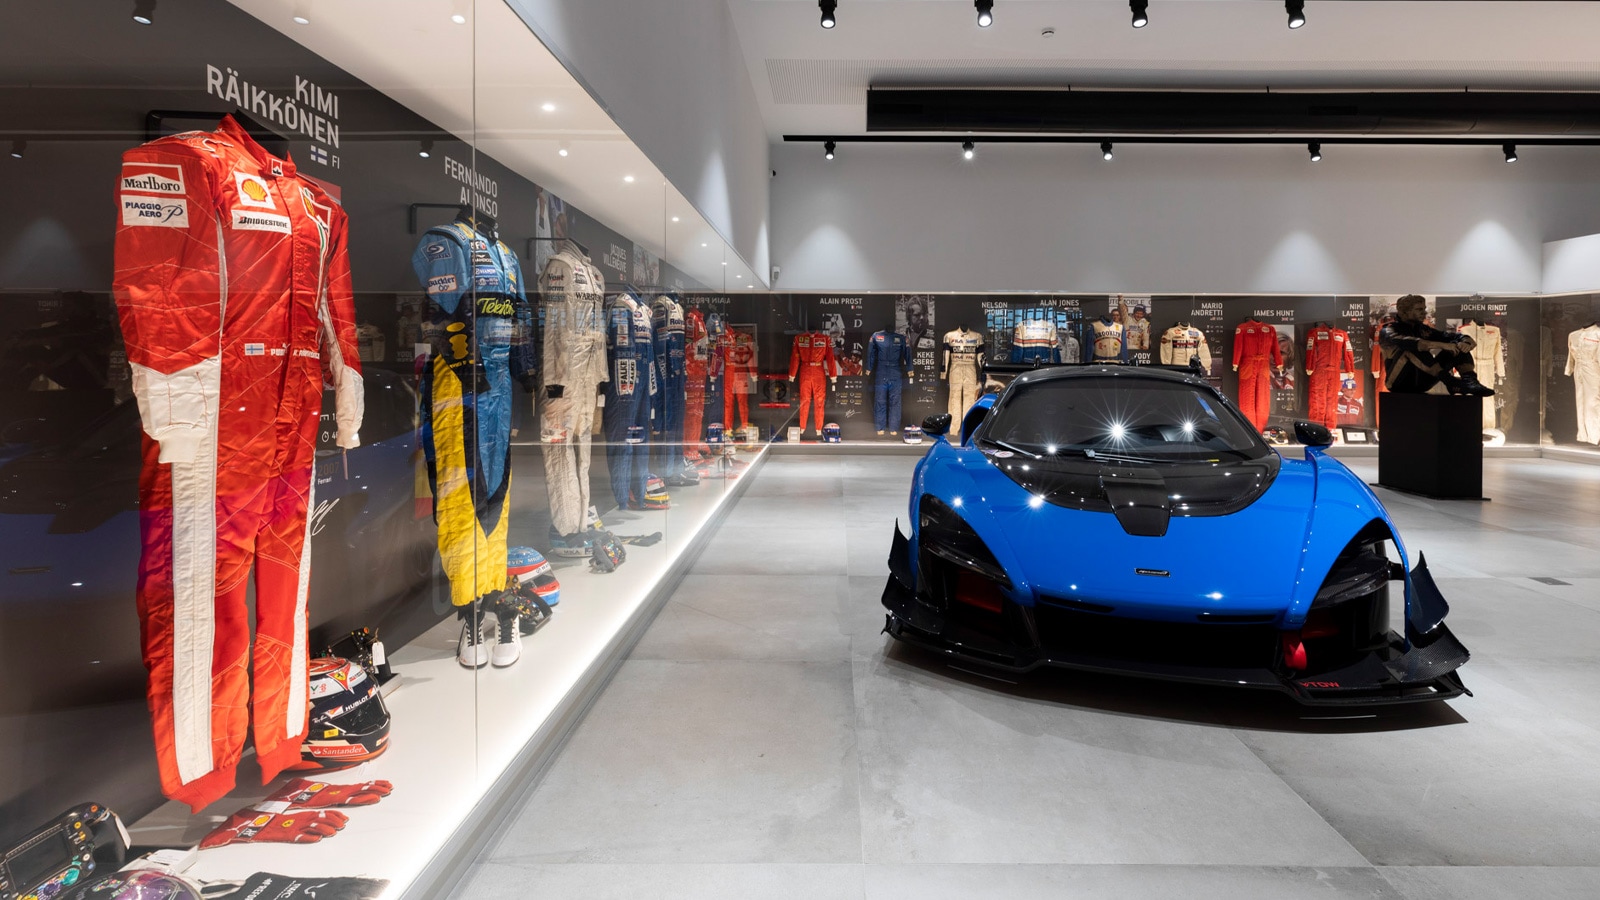 McLaren Barcelona, together with Porcelanosa, signs a unique space in the heart of Barcelona